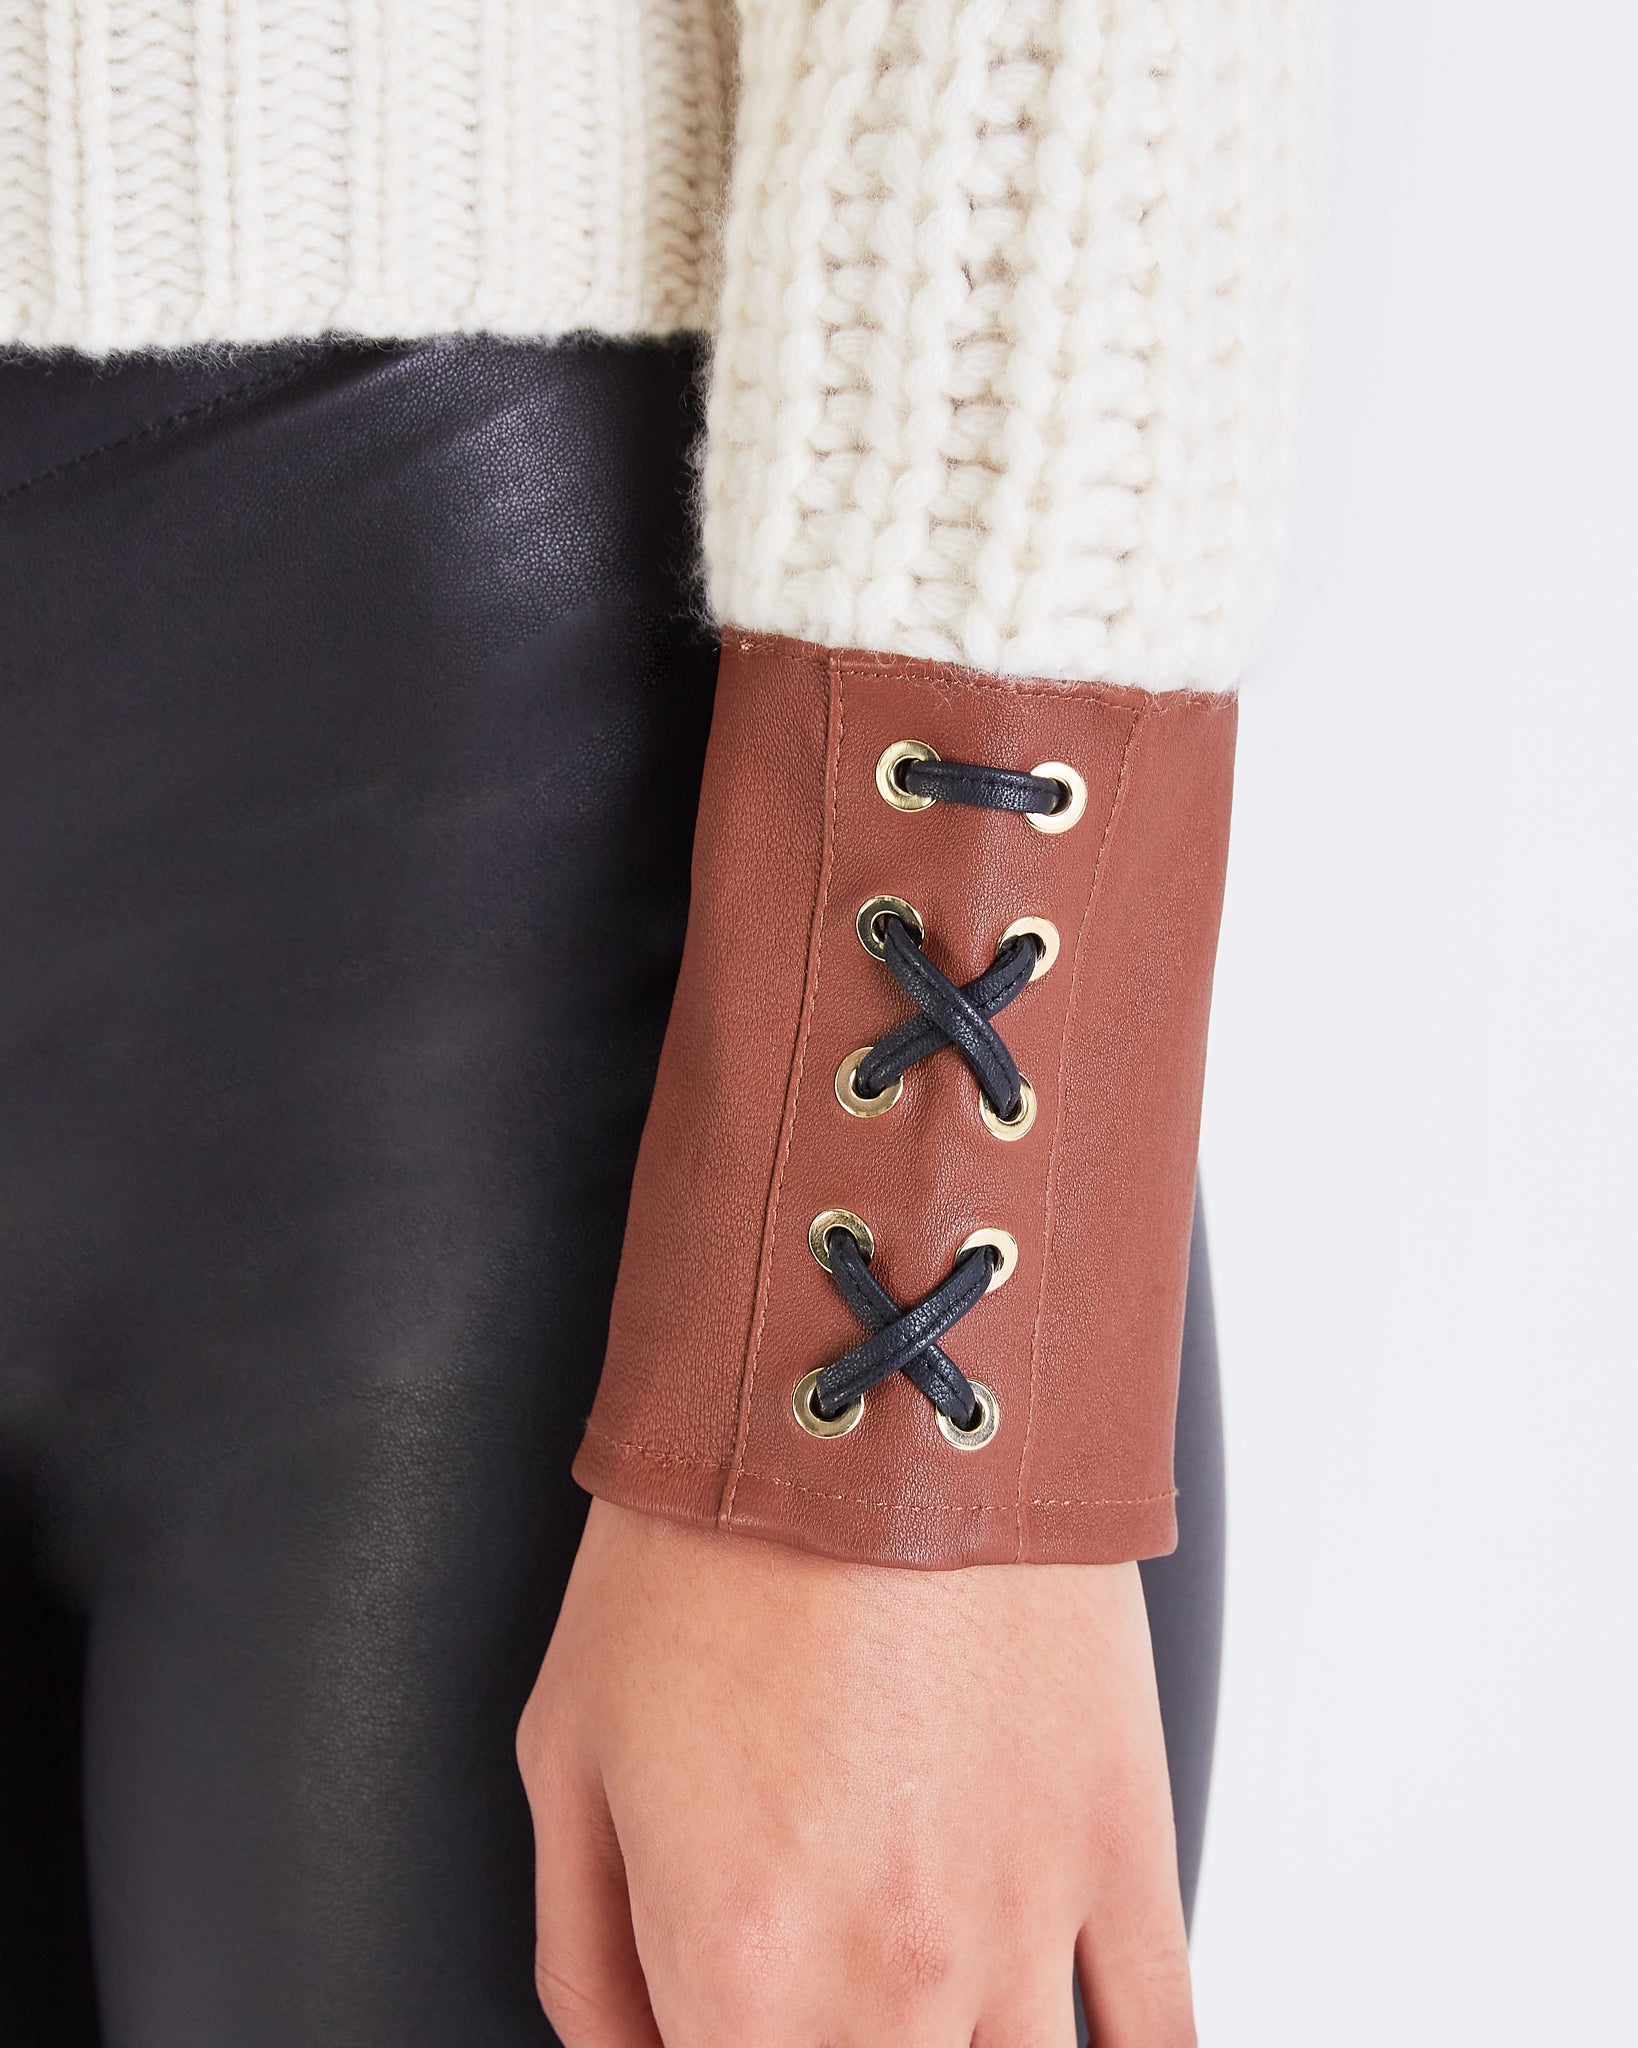 Hero CROPPED CASHMERE LEATHER SWEATER - MILK/COGNAC